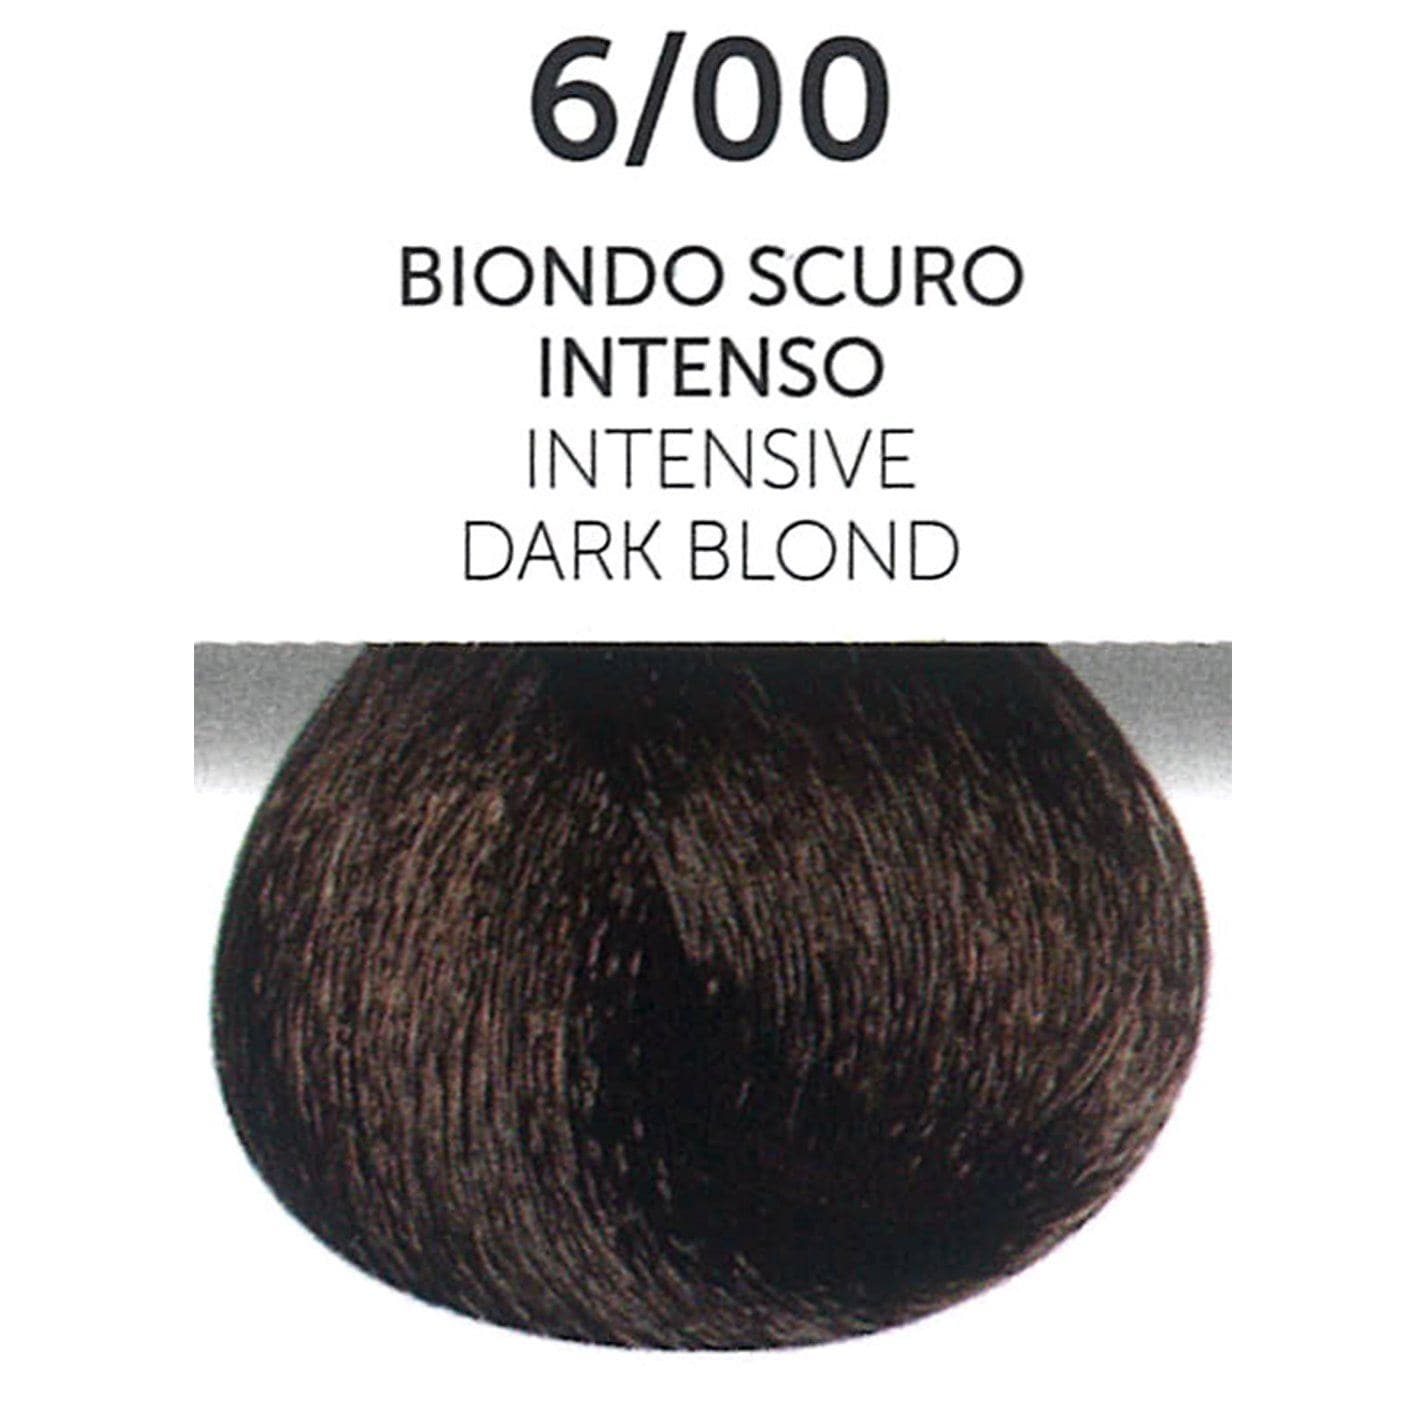 6/00 Intensive Dark Blond | Permanent Hair Color | Perlacolor | OYSTER - SH Salons